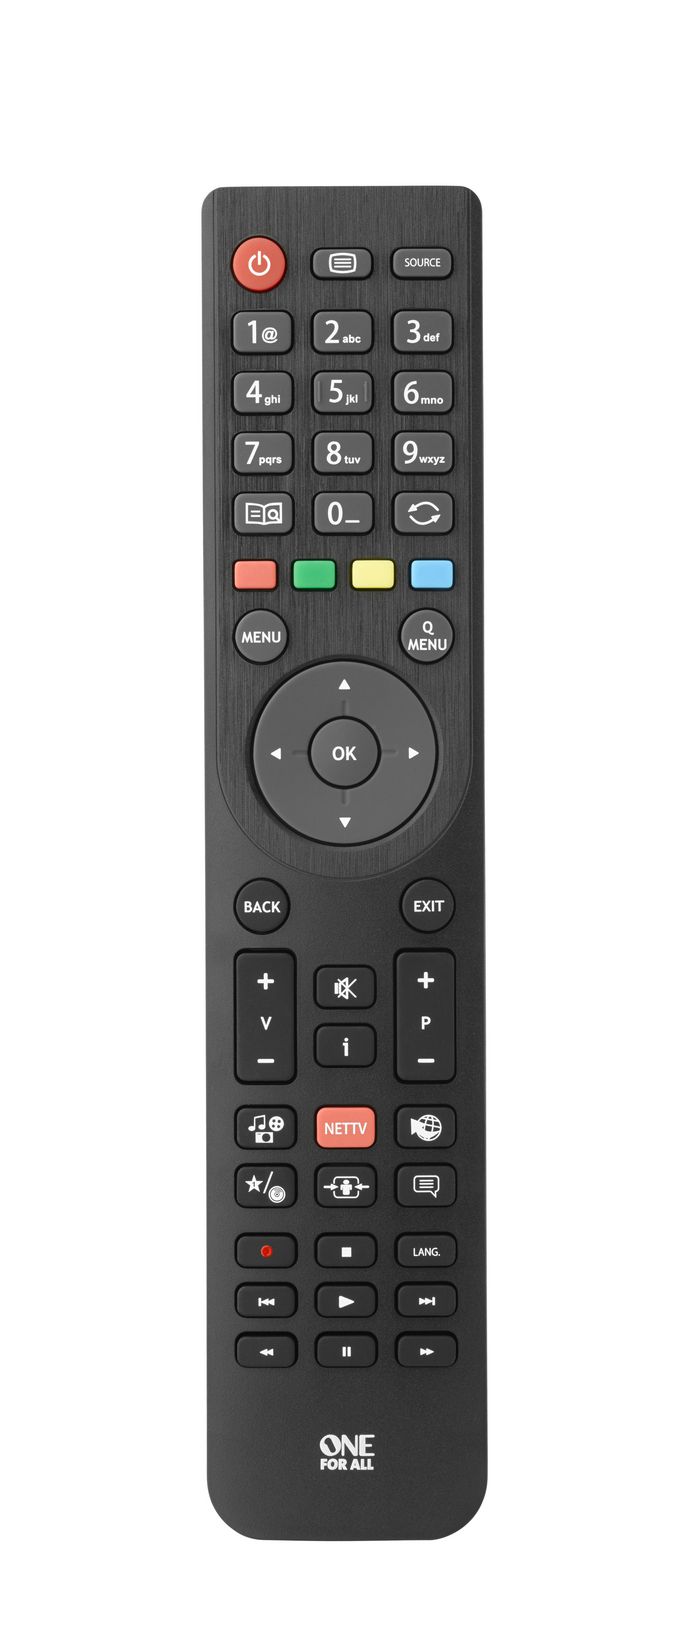 One For All Tv Replacement Remotes Telefunken Tv Replacement Remote - W128559505